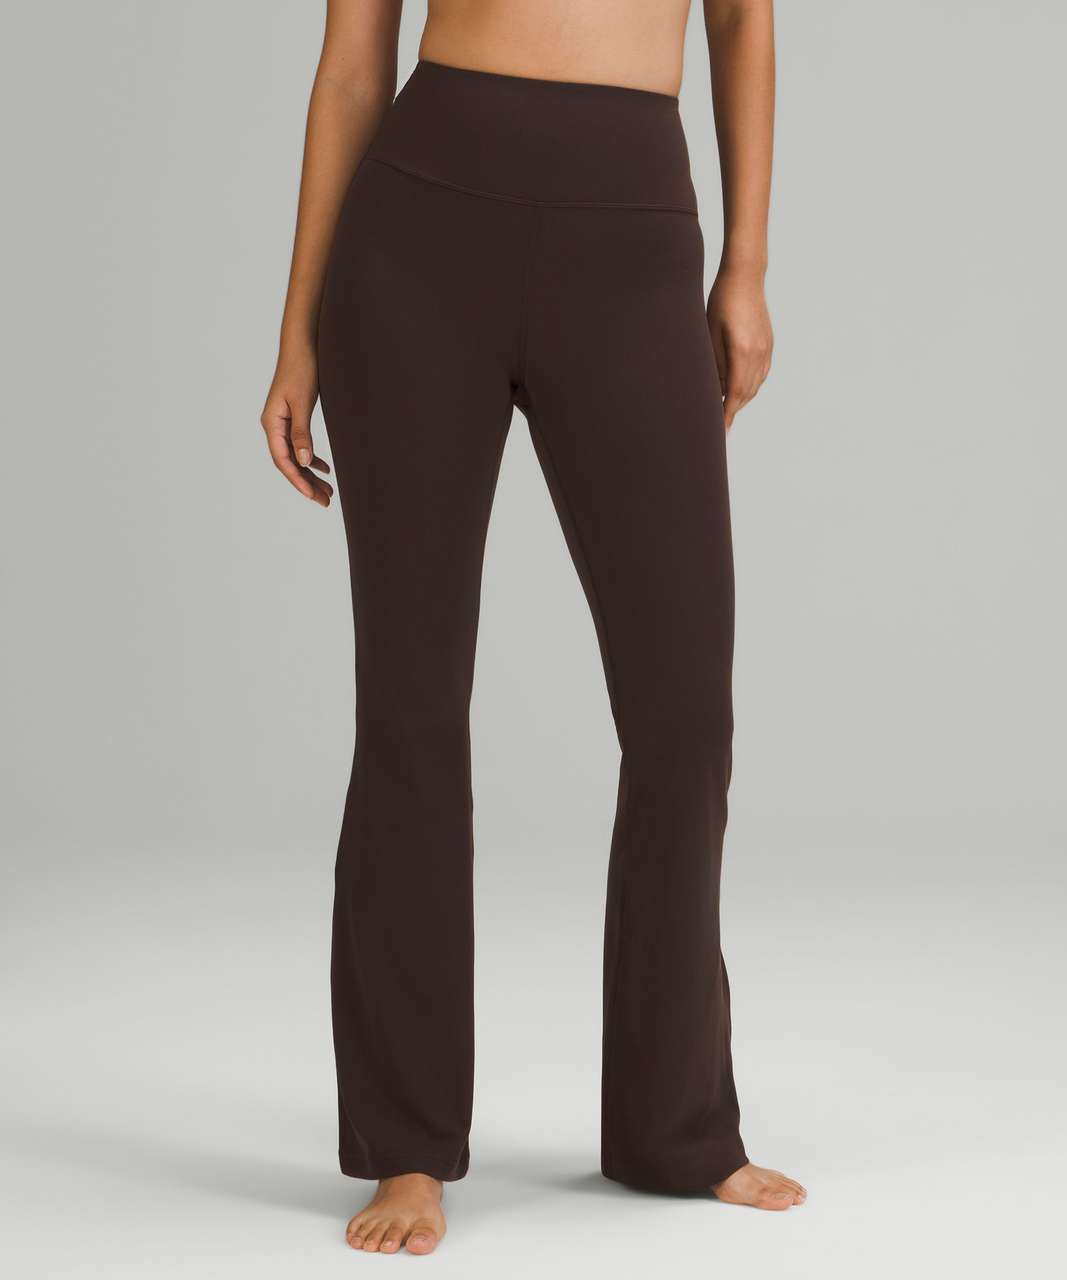 Lululemon Groove Super-High-Rise Flared Pant Nulu - French Press